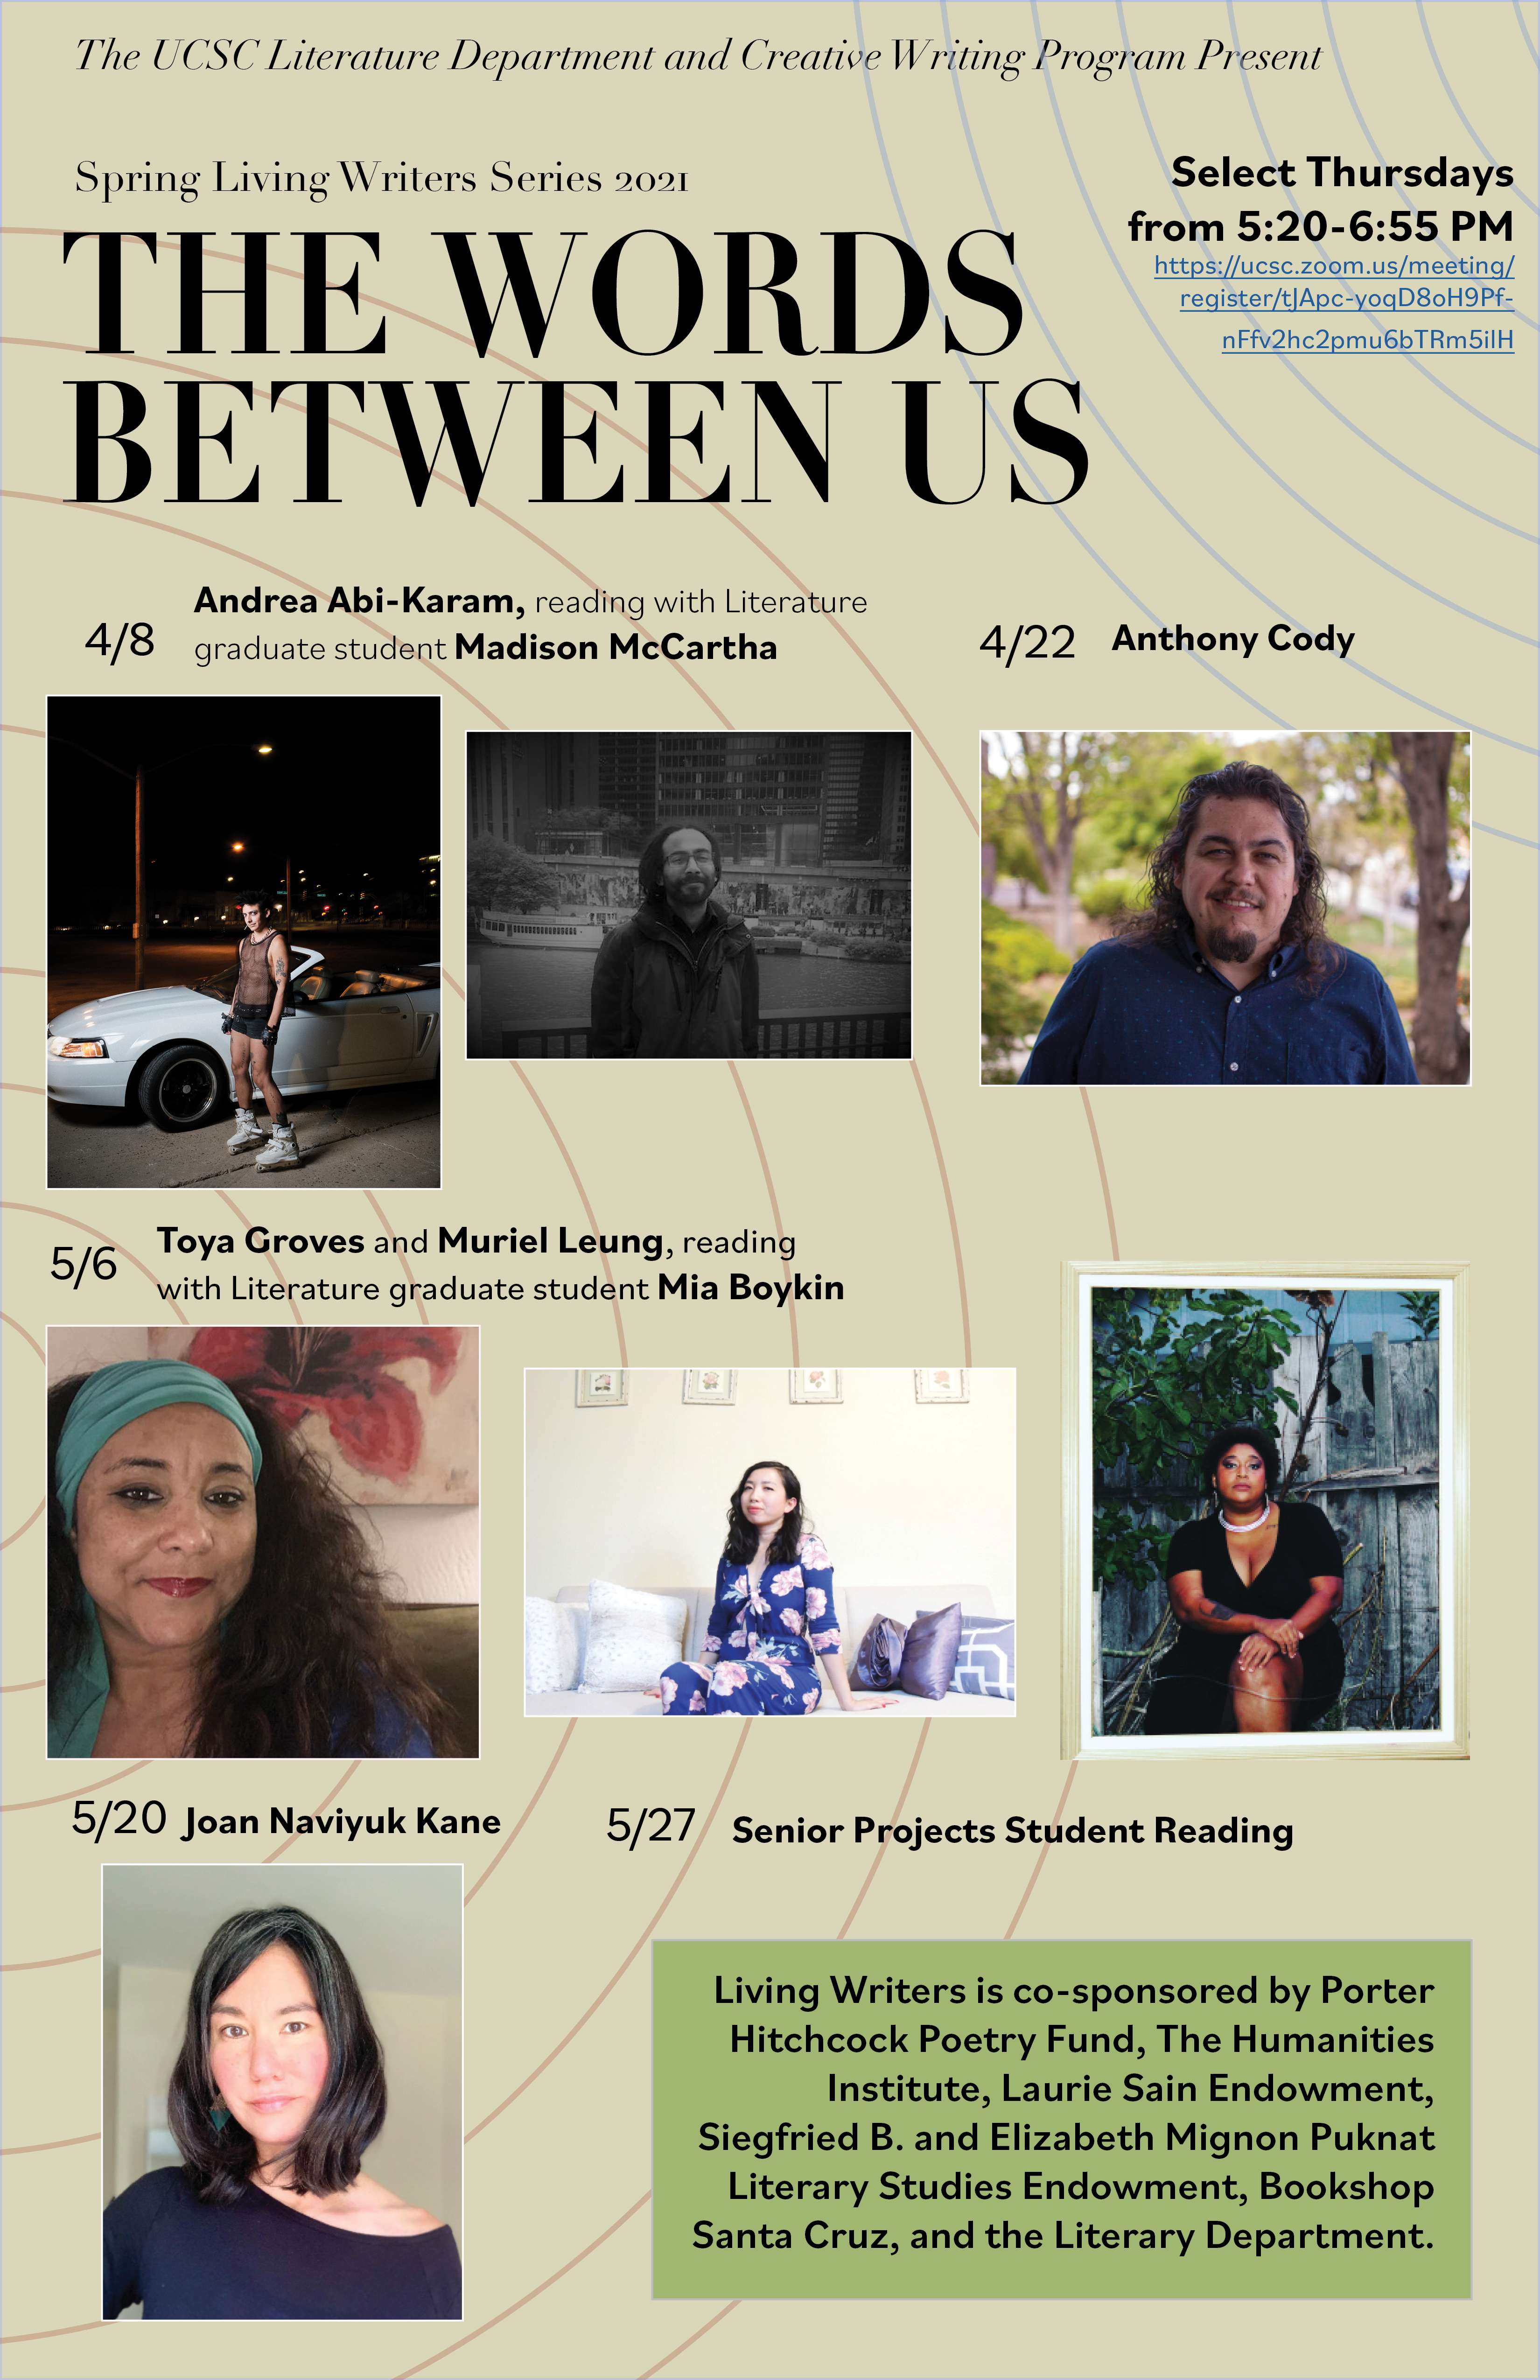 Spring Living Writers Series 2021, The Words Between Us, Select Thursdays from 5:20pm - 6:55pm. 7 headshots of writers with their names (listed in greater detail in text below) on a tan background with spirals.